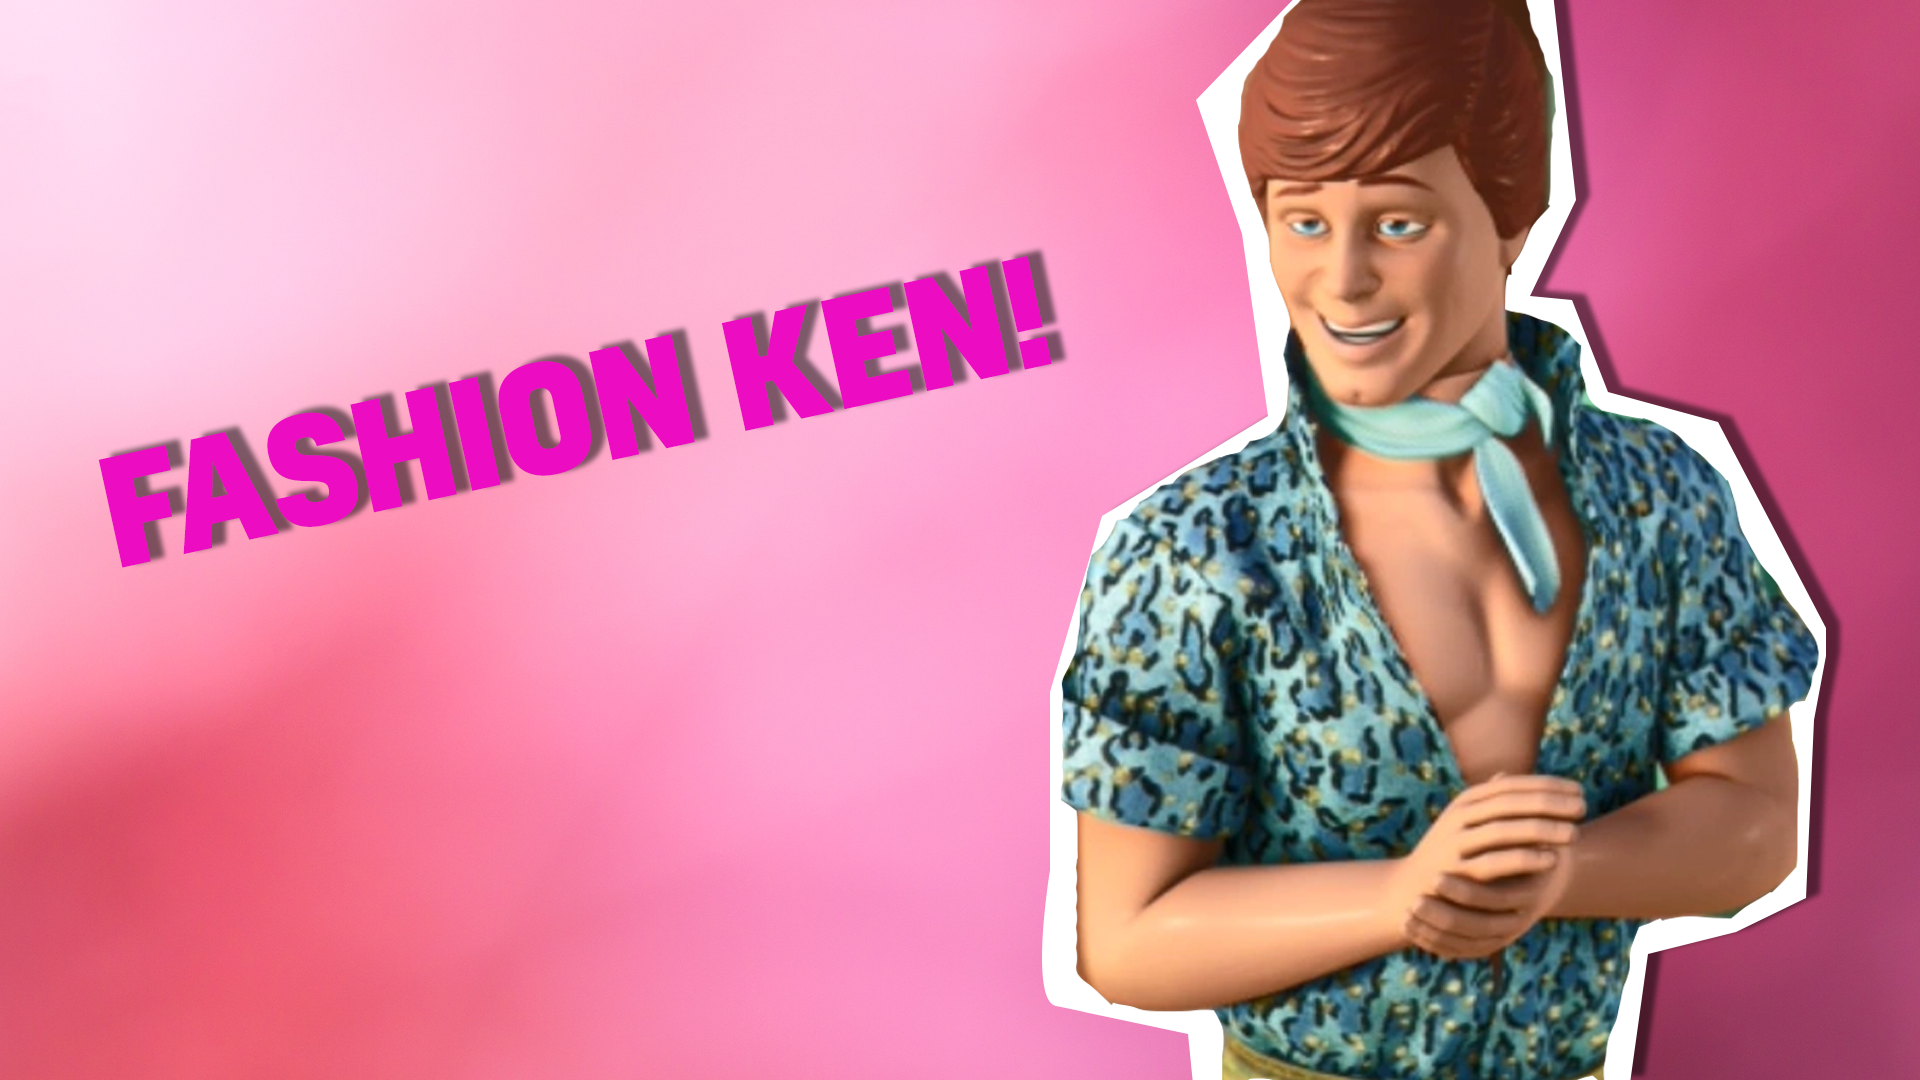 You're Fashion Ken! You are a real trendsetter and you're always giving your friends fashion tips!